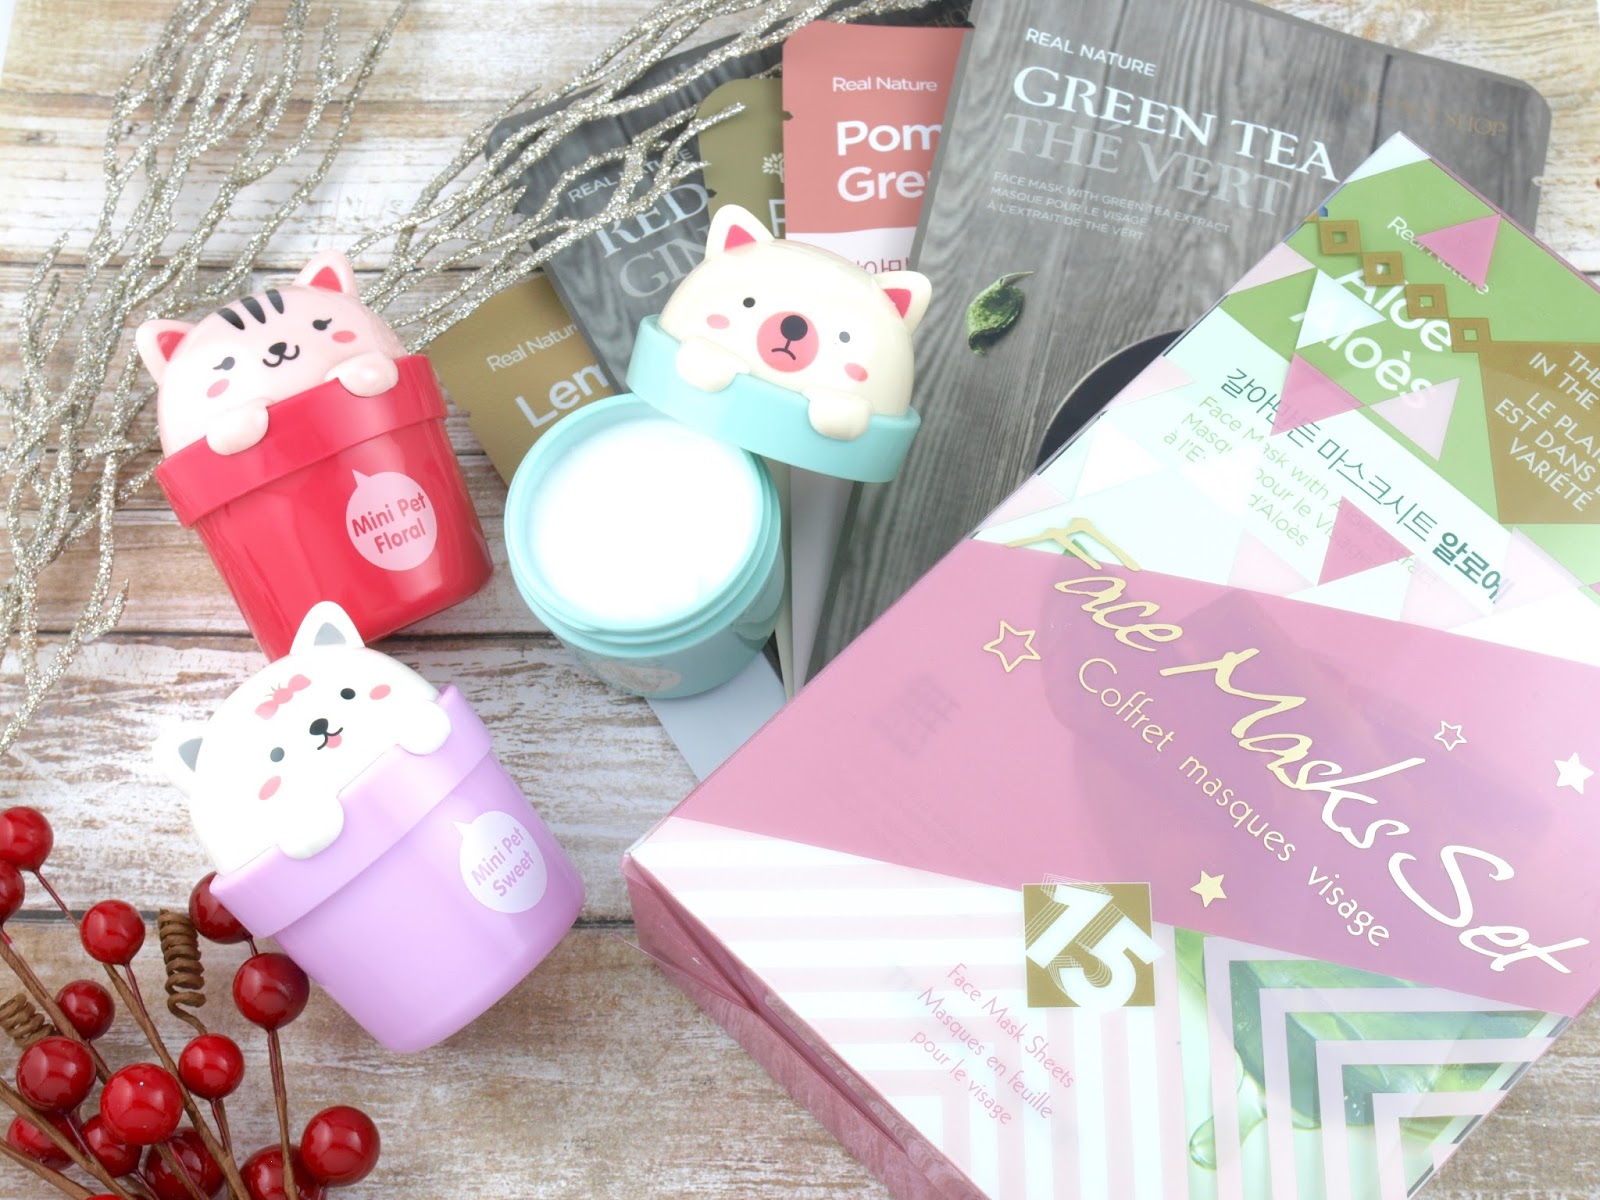 THEFACESHOP Holiday 2016 Gift Guide